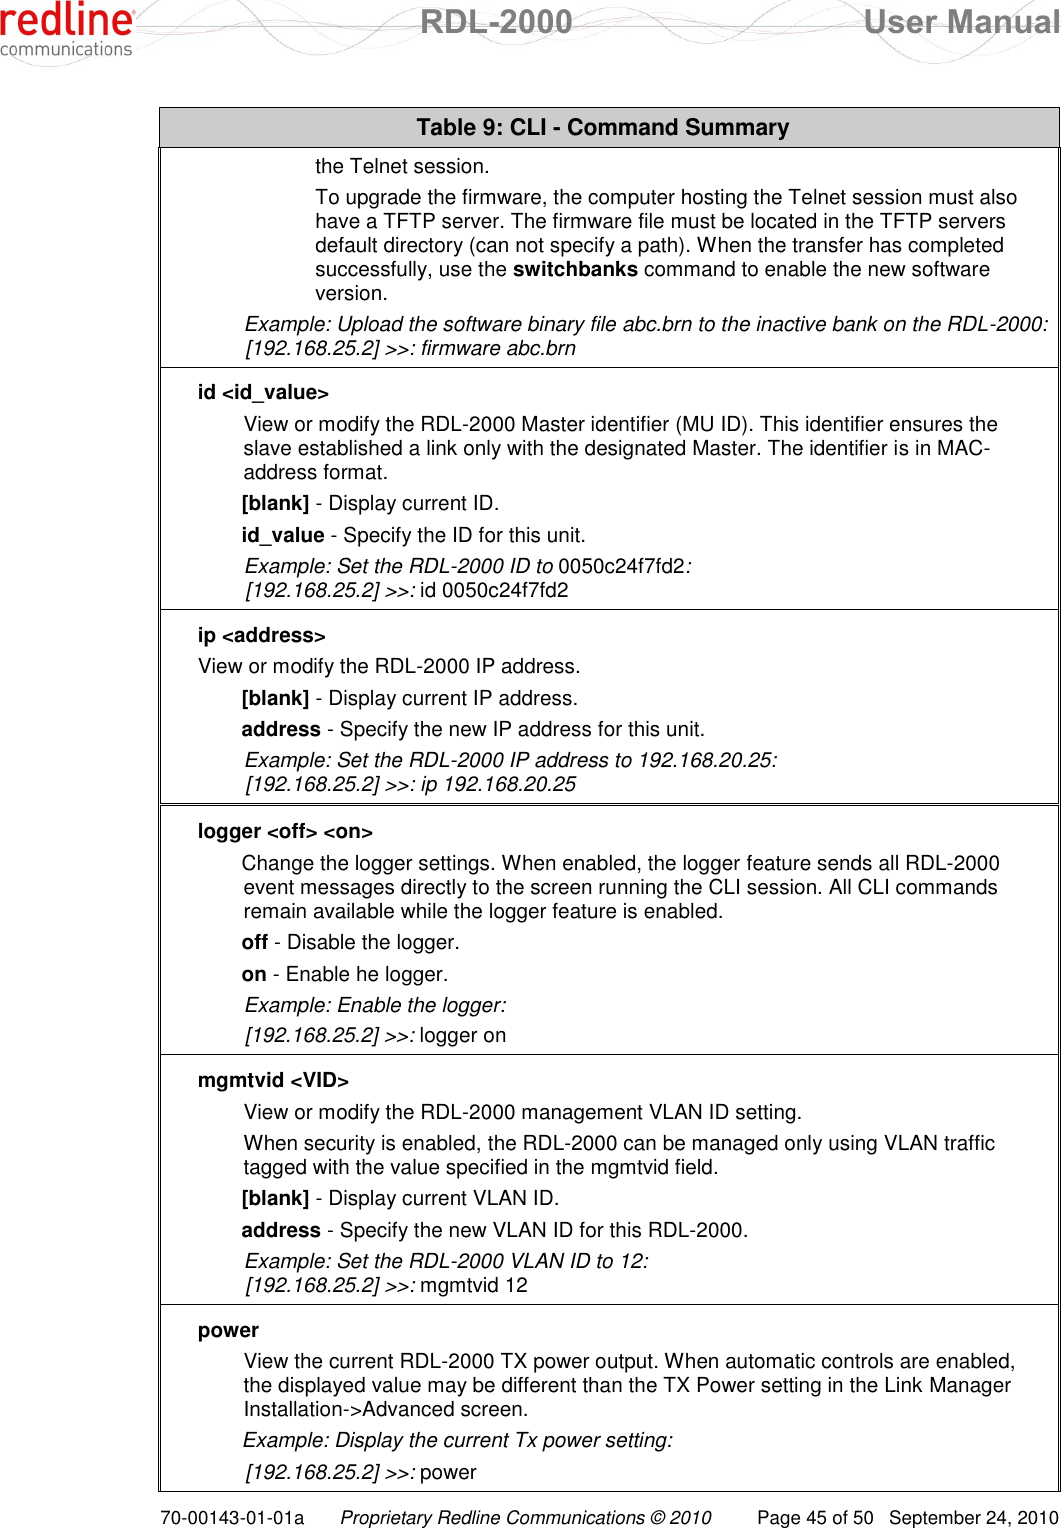  RDL-2000  User Manual 70-00143-01-01a Proprietary Redline Communications © 2010  Page 45 of 50  September 24, 2010 Table 9: CLI - Command Summary the Telnet session.   To upgrade the firmware, the computer hosting the Telnet session must also have a TFTP server. The firmware file must be located in the TFTP servers default directory (can not specify a path). When the transfer has completed successfully, use the switchbanks command to enable the new software version.  Example: Upload the software binary file abc.brn to the inactive bank on the RDL-2000:   [192.168.25.2] &gt;&gt;: firmware abc.brn id &lt;id_value&gt; View or modify the RDL-2000 Master identifier (MU ID). This identifier ensures the slave established a link only with the designated Master. The identifier is in MAC-address format. [blank] - Display current ID. id_value - Specify the ID for this unit. Example: Set the RDL-2000 ID to 0050c24f7fd2:  [192.168.25.2] &gt;&gt;: id 0050c24f7fd2 ip &lt;address&gt; View or modify the RDL-2000 IP address. [blank] - Display current IP address. address - Specify the new IP address for this unit. Example: Set the RDL-2000 IP address to 192.168.20.25:   [192.168.25.2] &gt;&gt;: ip 192.168.20.25 logger &lt;off&gt; &lt;on&gt; Change the logger settings. When enabled, the logger feature sends all RDL-2000 event messages directly to the screen running the CLI session. All CLI commands remain available while the logger feature is enabled. off - Disable the logger. on - Enable he logger. Example: Enable the logger:  [192.168.25.2] &gt;&gt;: logger on mgmtvid &lt;VID&gt; View or modify the RDL-2000 management VLAN ID setting.  When security is enabled, the RDL-2000 can be managed only using VLAN traffic tagged with the value specified in the mgmtvid field.  [blank] - Display current VLAN ID. address - Specify the new VLAN ID for this RDL-2000. Example: Set the RDL-2000 VLAN ID to 12:  [192.168.25.2] &gt;&gt;: mgmtvid 12 power View the current RDL-2000 TX power output. When automatic controls are enabled, the displayed value may be different than the TX Power setting in the Link Manager Installation-&gt;Advanced screen. Example: Display the current Tx power setting:  [192.168.25.2] &gt;&gt;: power 